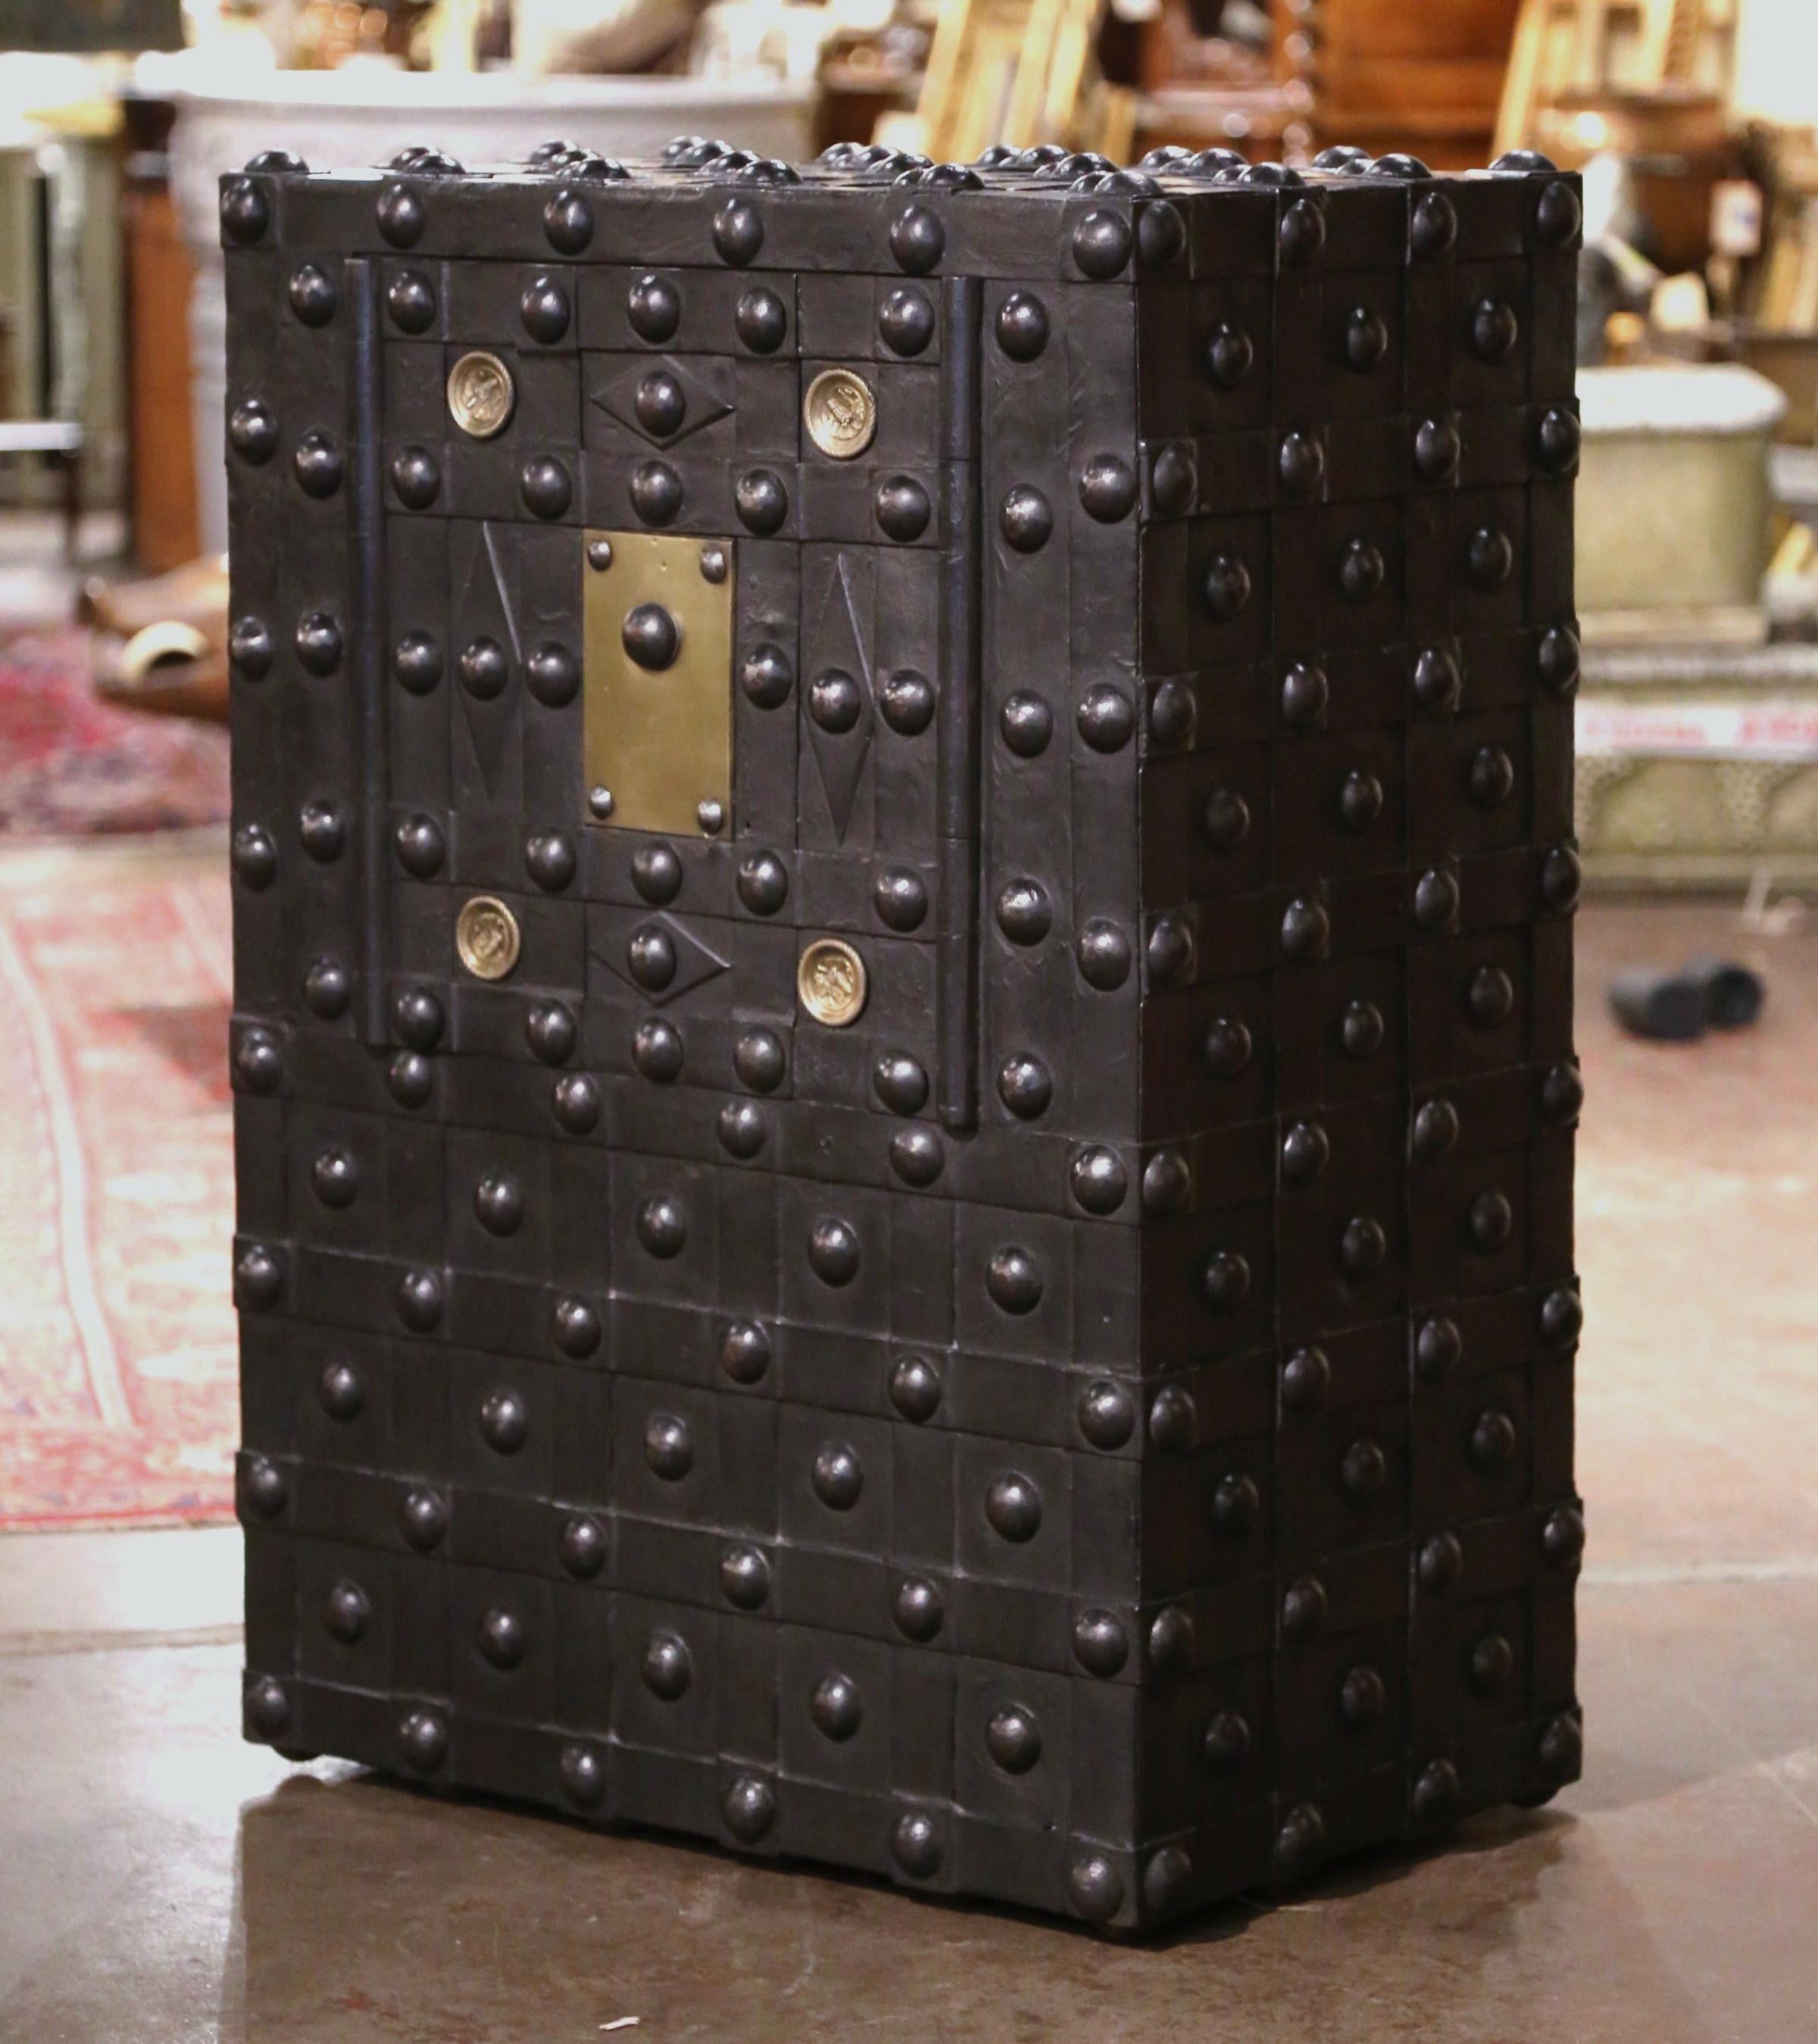 Keep your valuables and important documents in this large antique hobnail safe. Manufactured by Magaud de Charf in Marseilles, France circa 1870, the wrought iron safe is decorated with nail head motifs on all four sides and has an all-original,